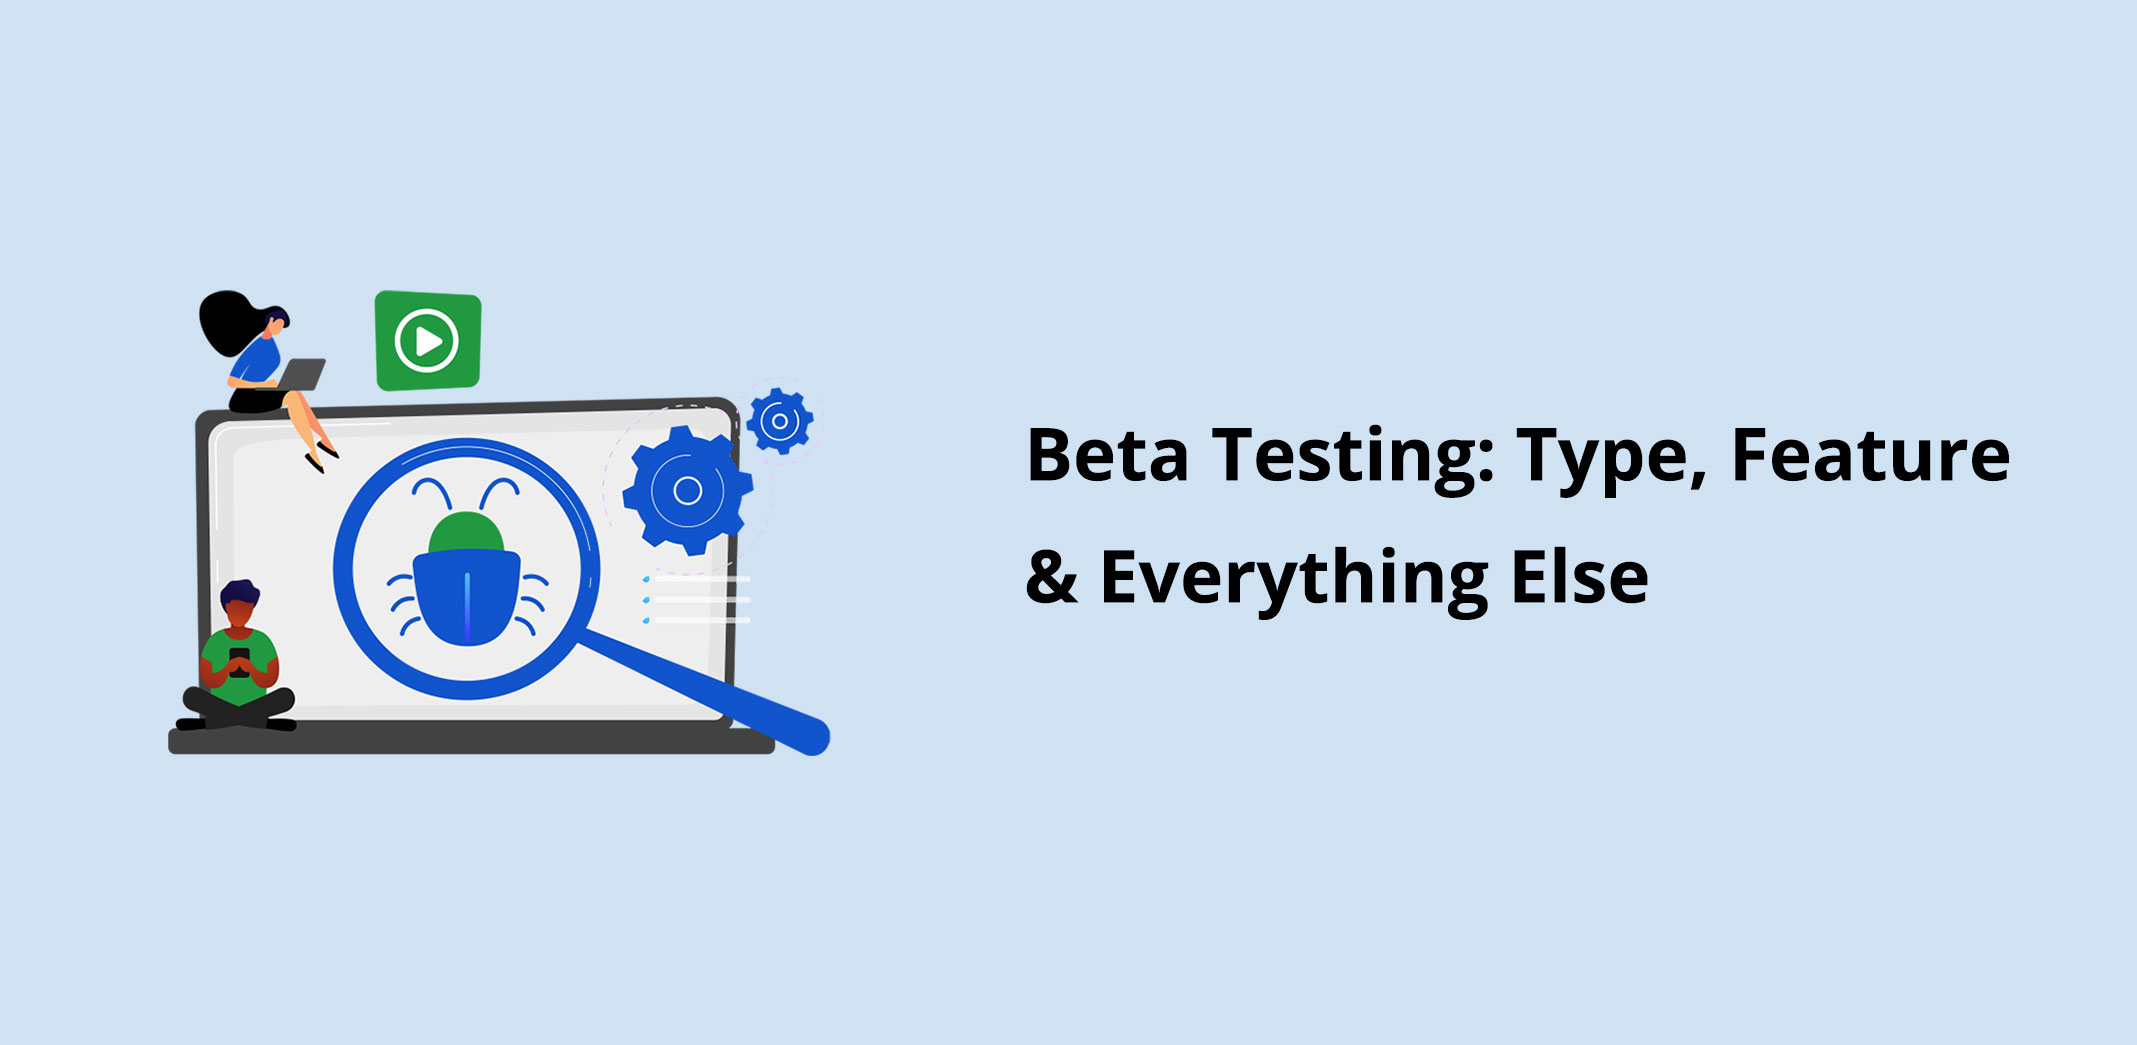 Beta Testing: Type, Feature & Everything Else